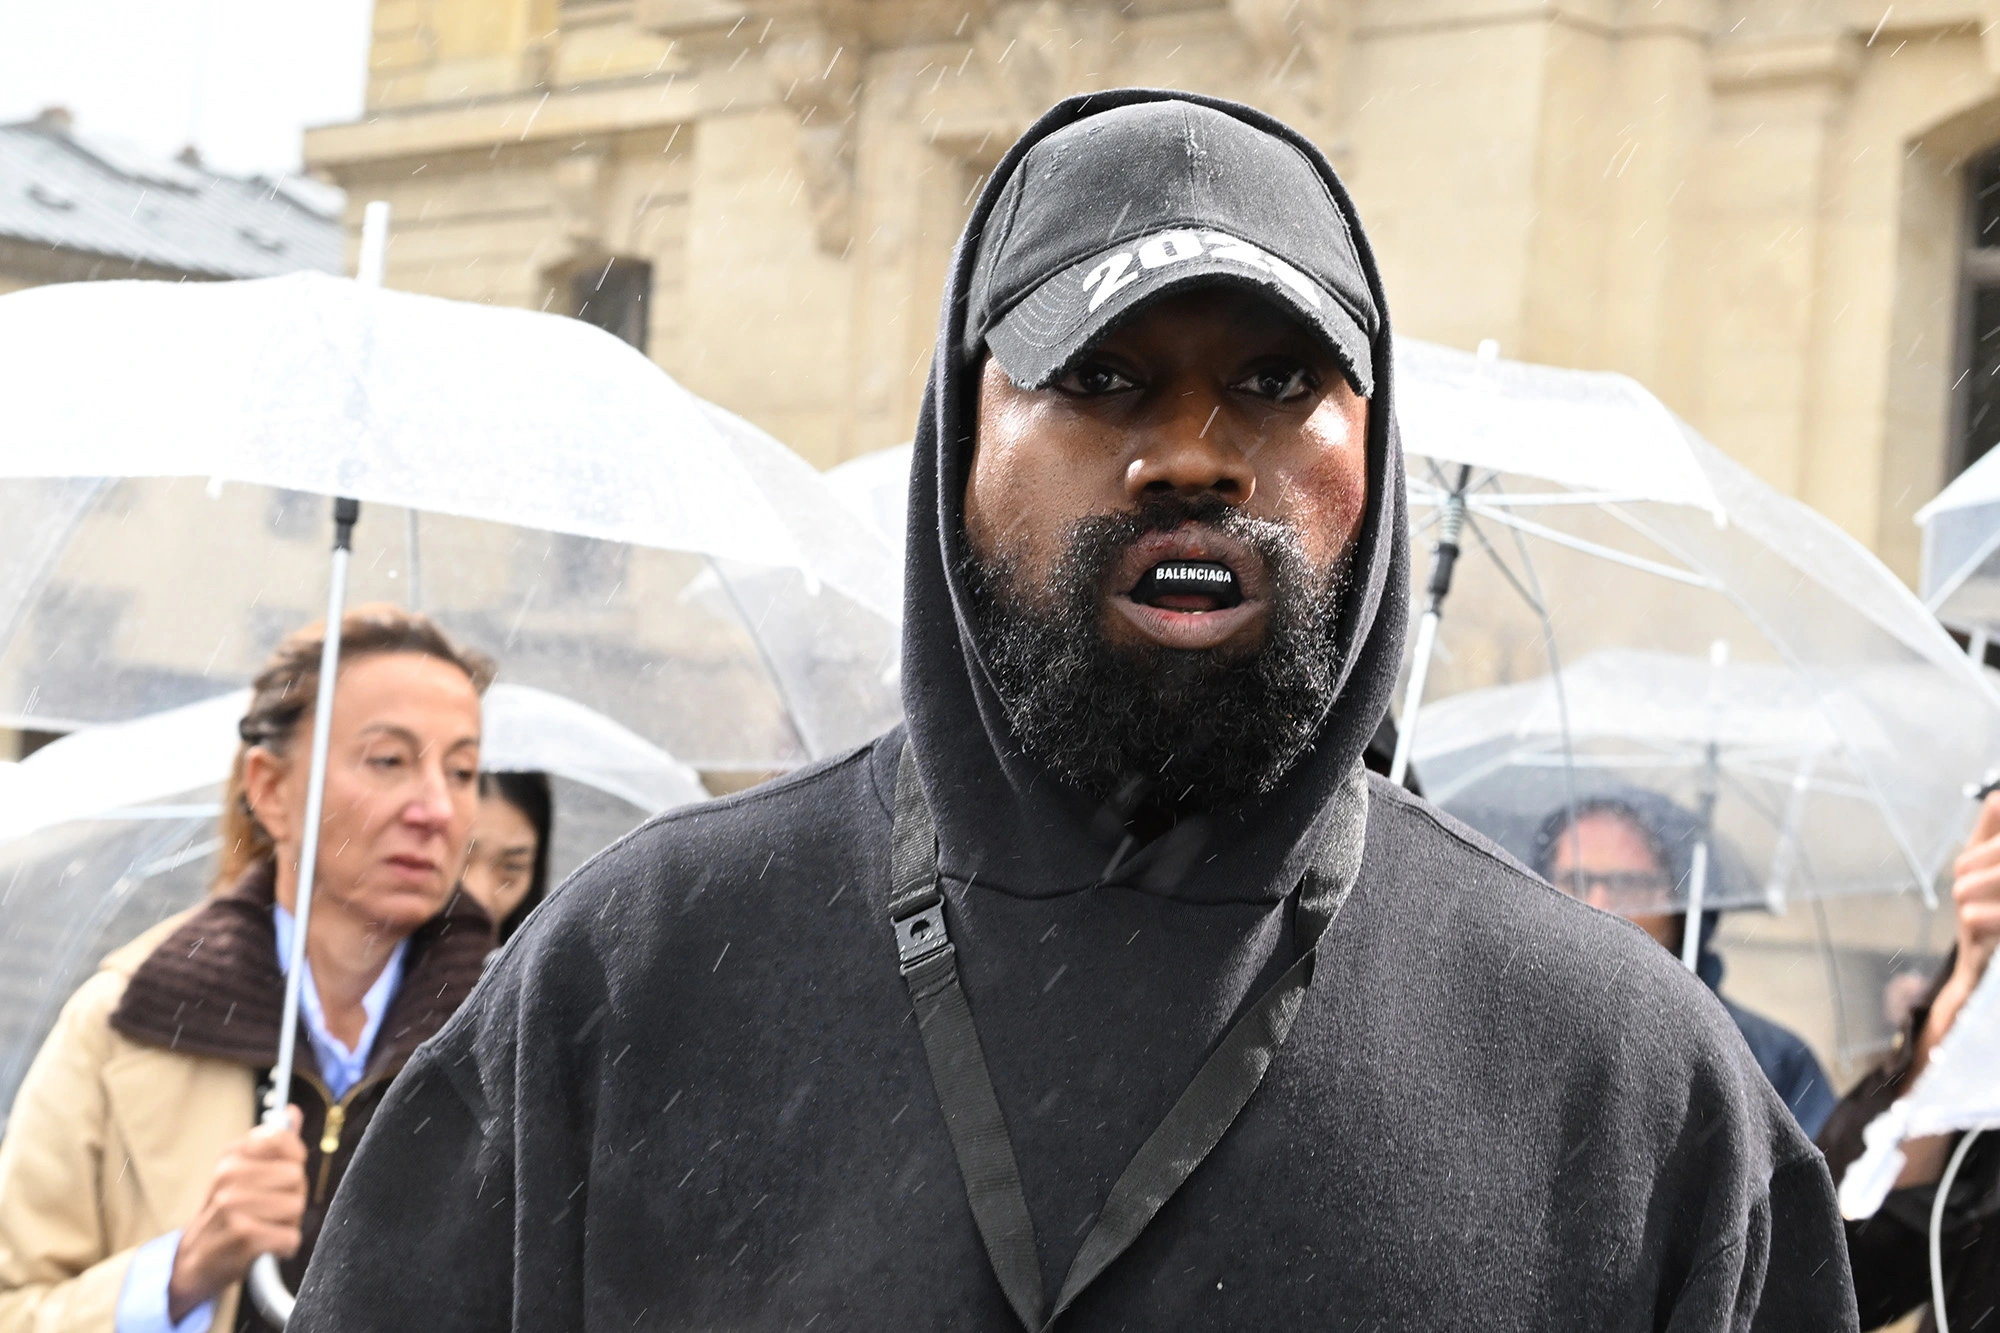 Kanye West Not Charged After Throwing Woman’s Phone in the Street [Video]